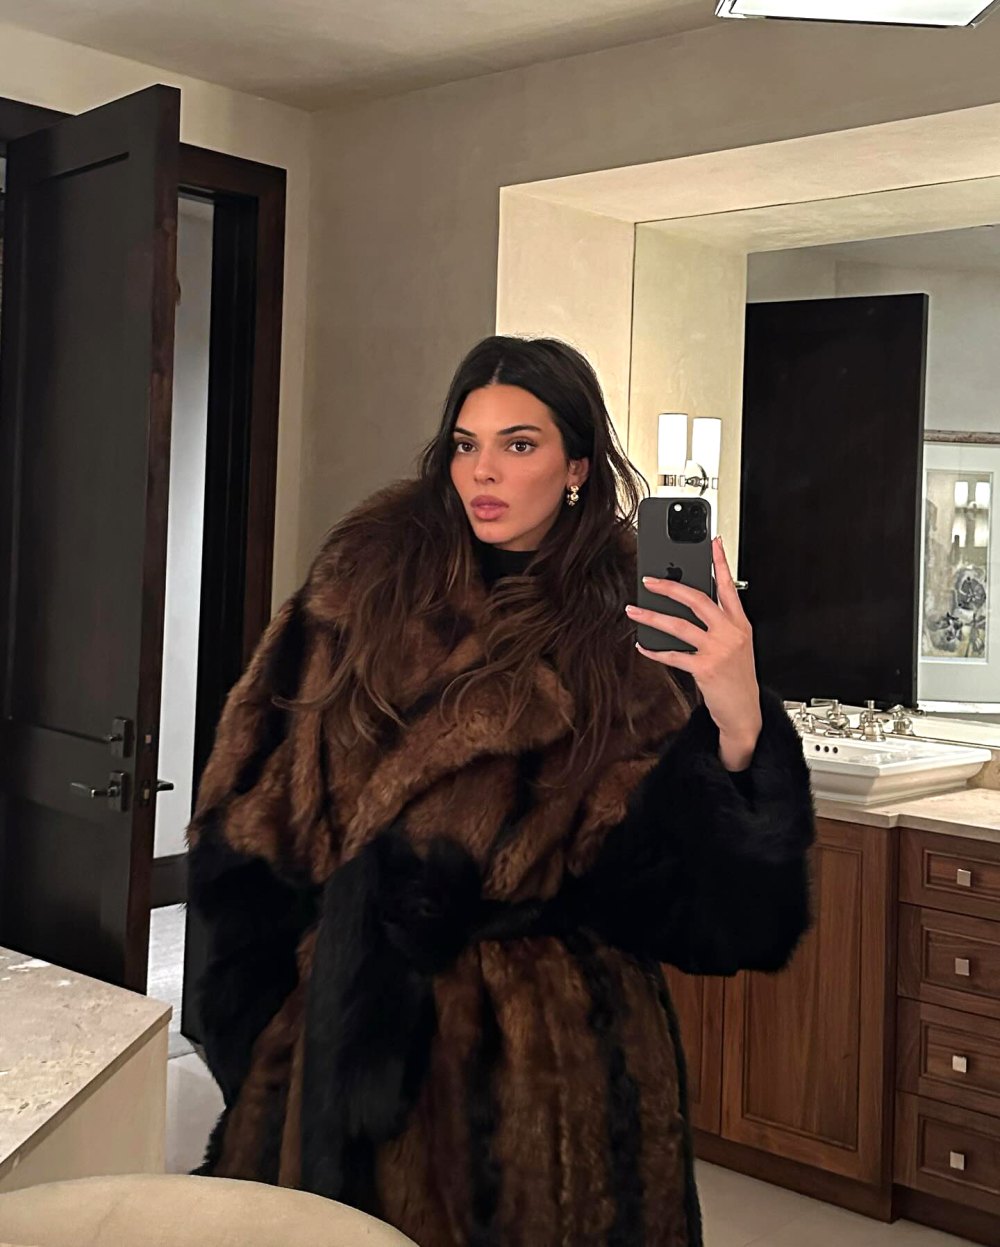 Kendall Jenner Creates Controversy in Oversized Fur Coat